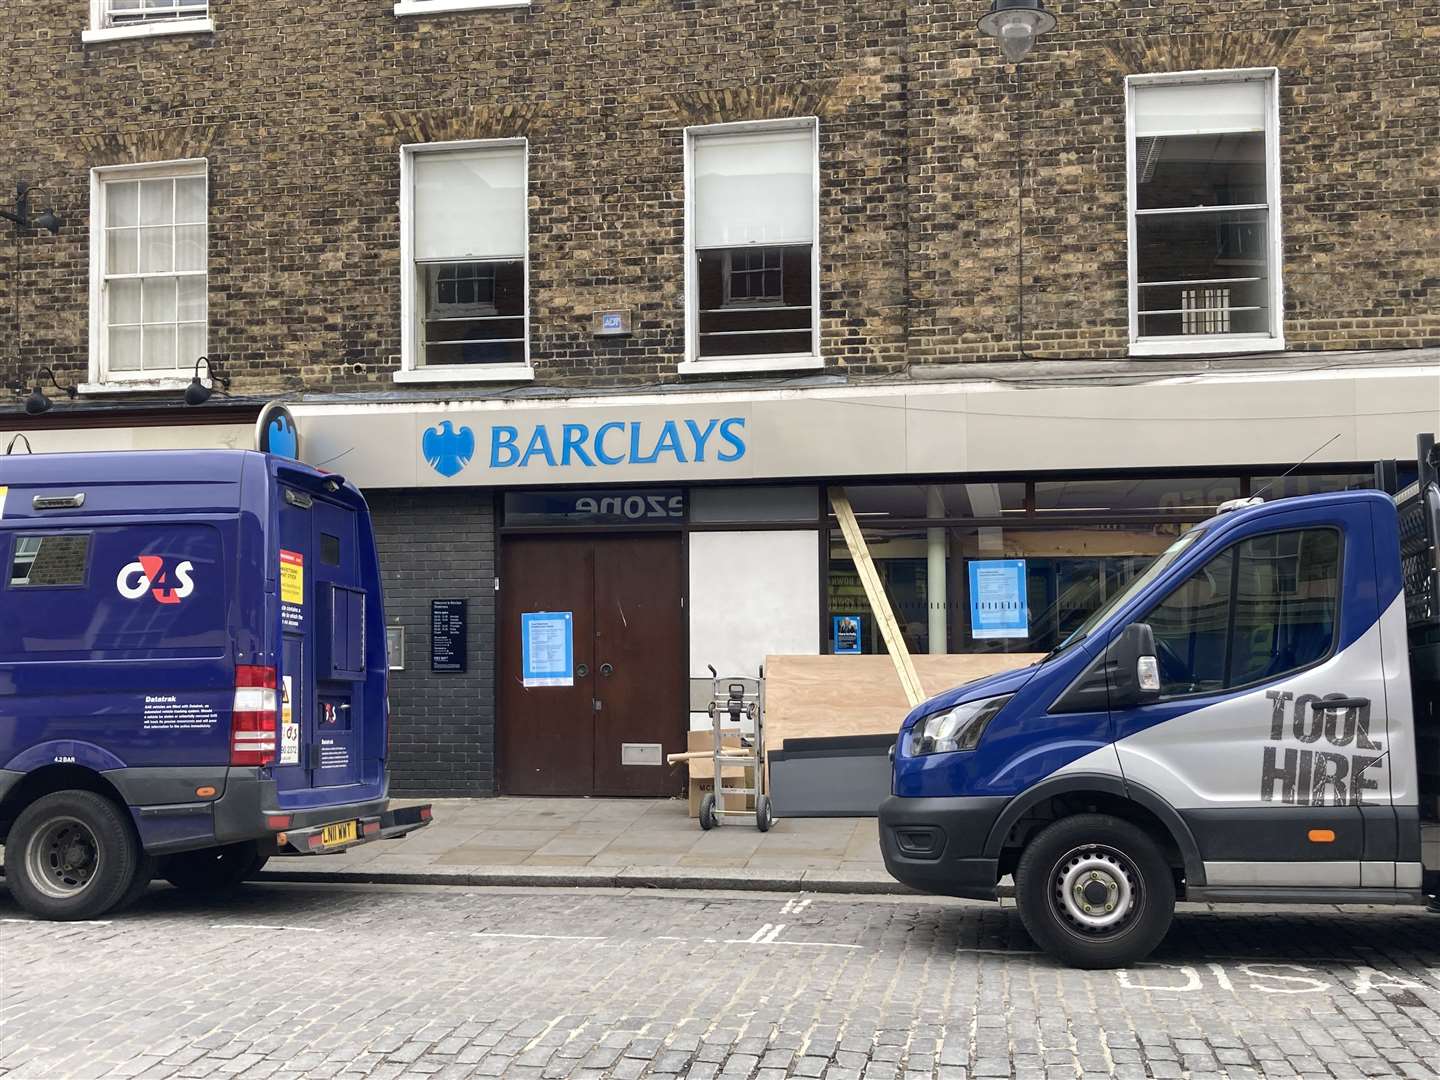 Barclays Bank has shut for good in Sheerness Broadway. Workers arrived to unload scaffolding and take away money during the Free Music Friday event. A poster announcing the closure is now on the bank's door